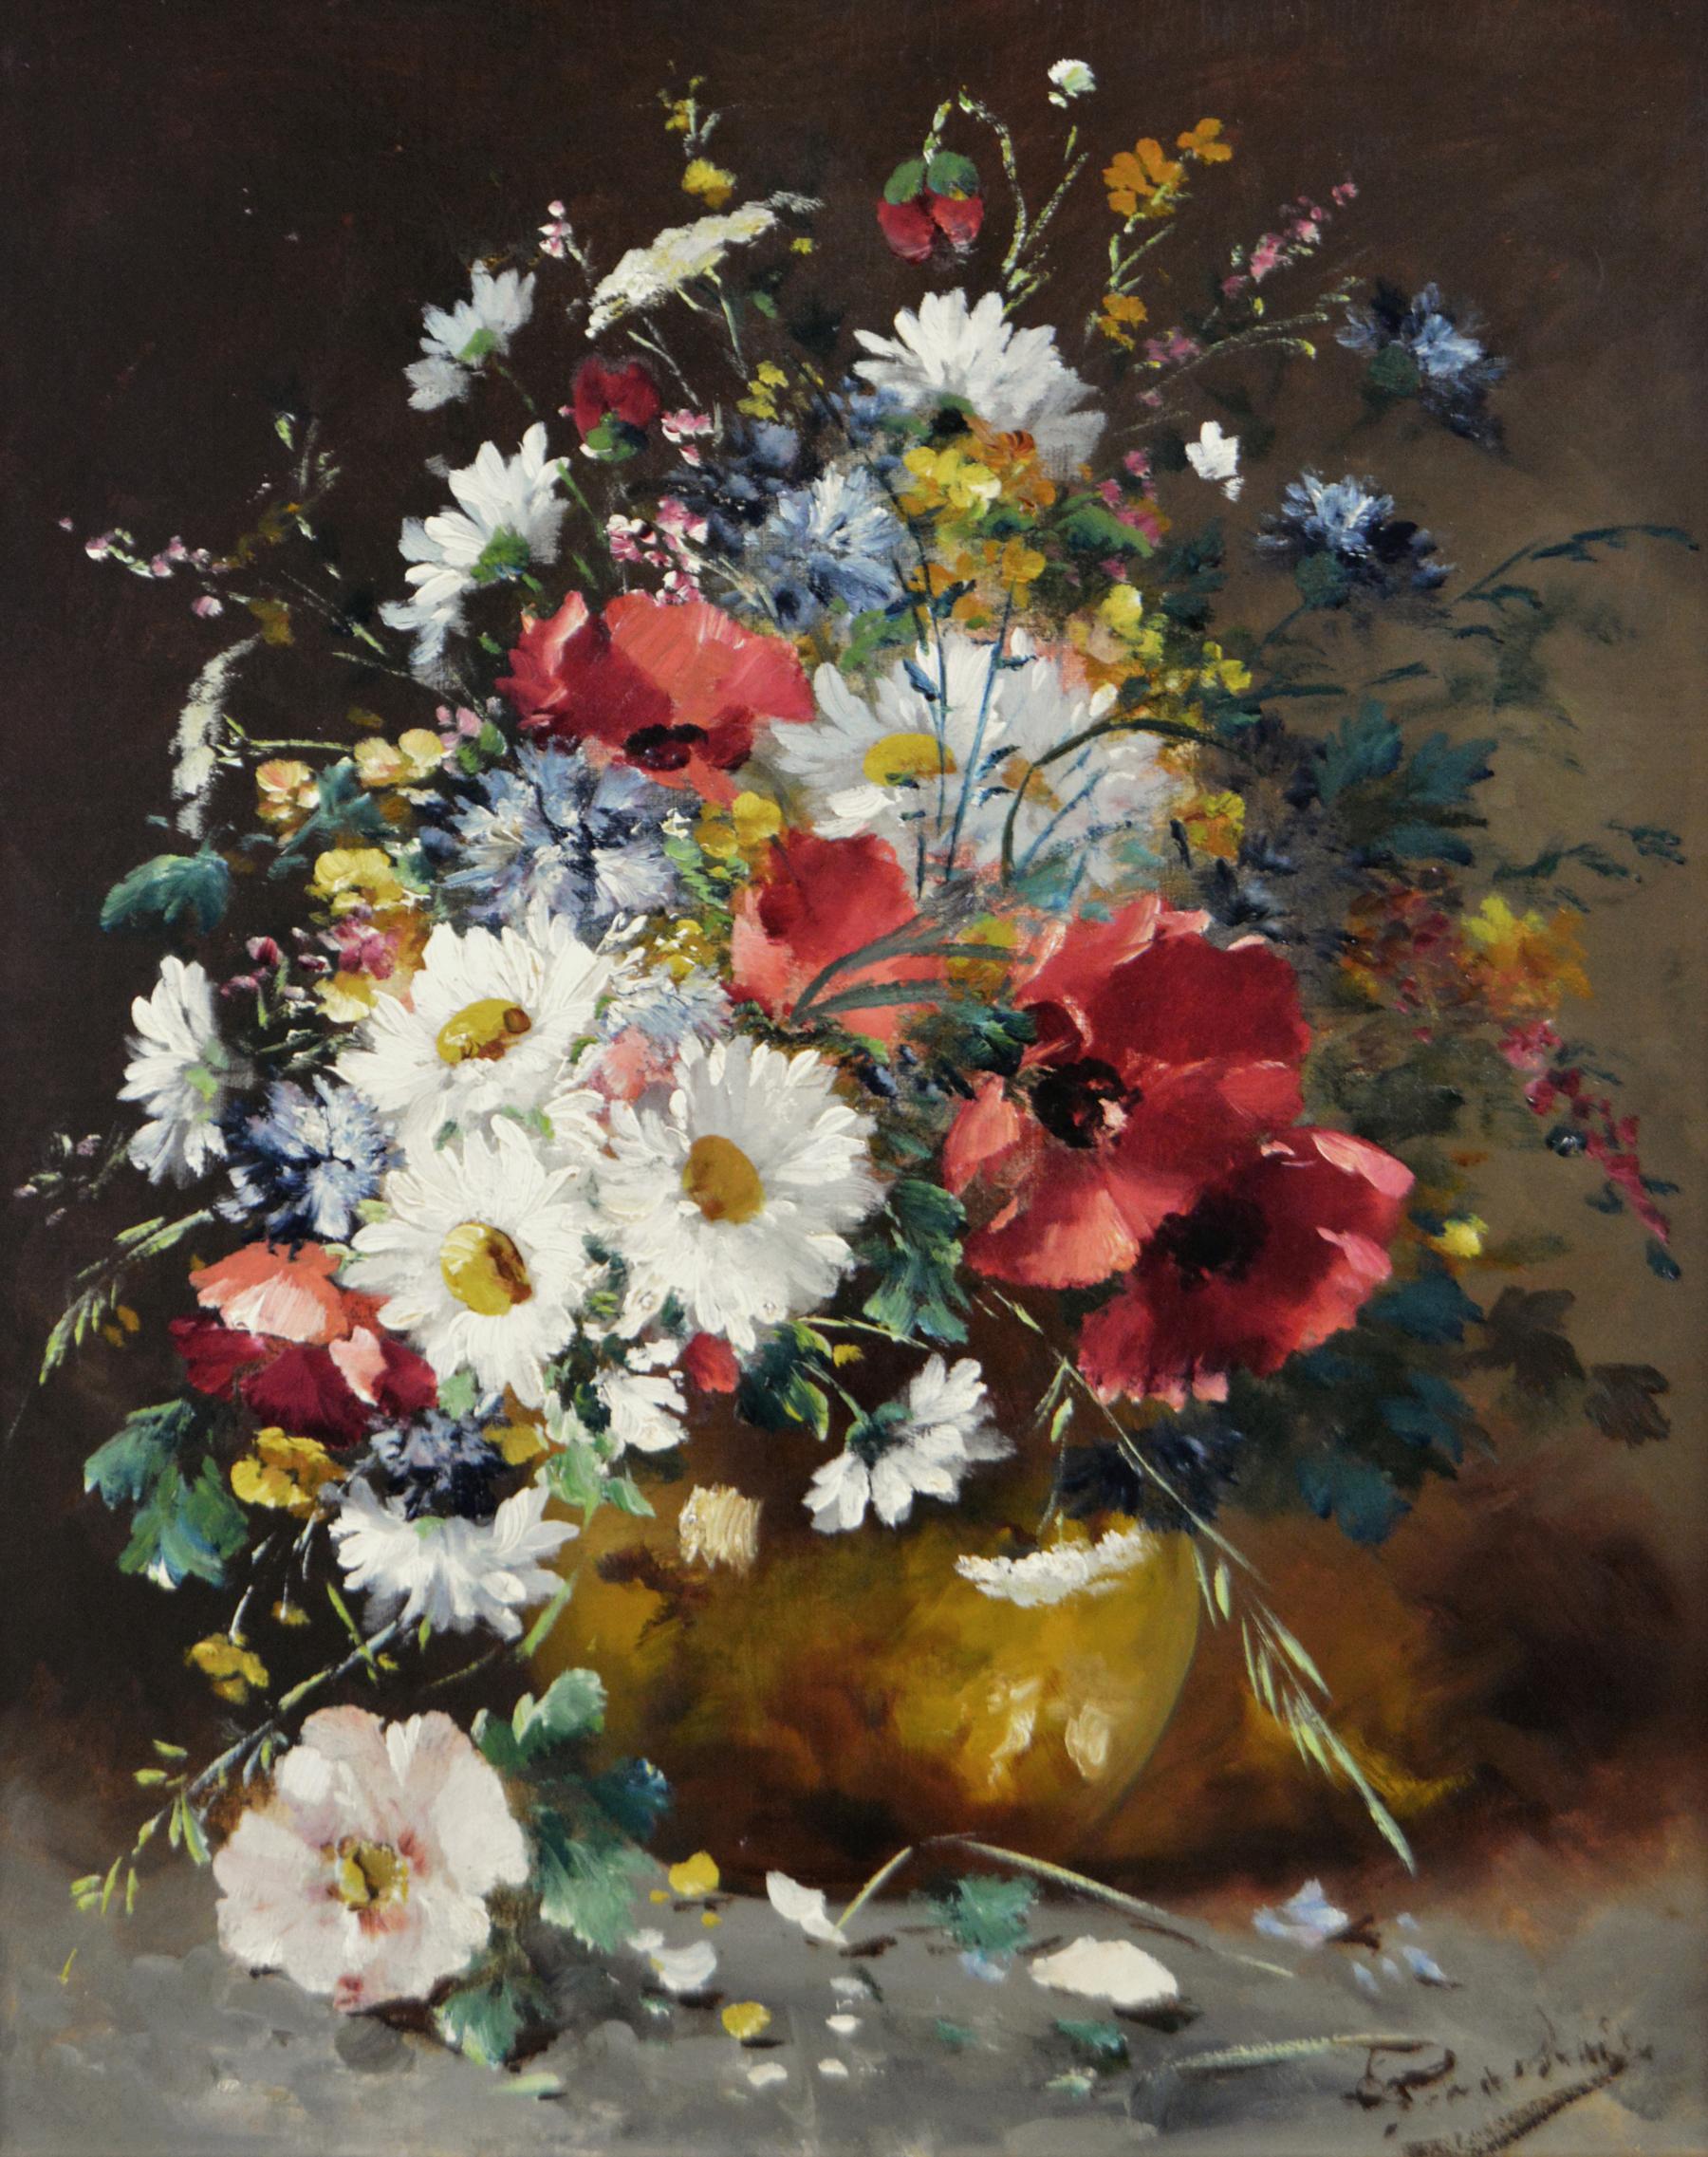 19th Century Still Life oil painting of flowers in a vase  - Painting by Eugene Henri Cauchois